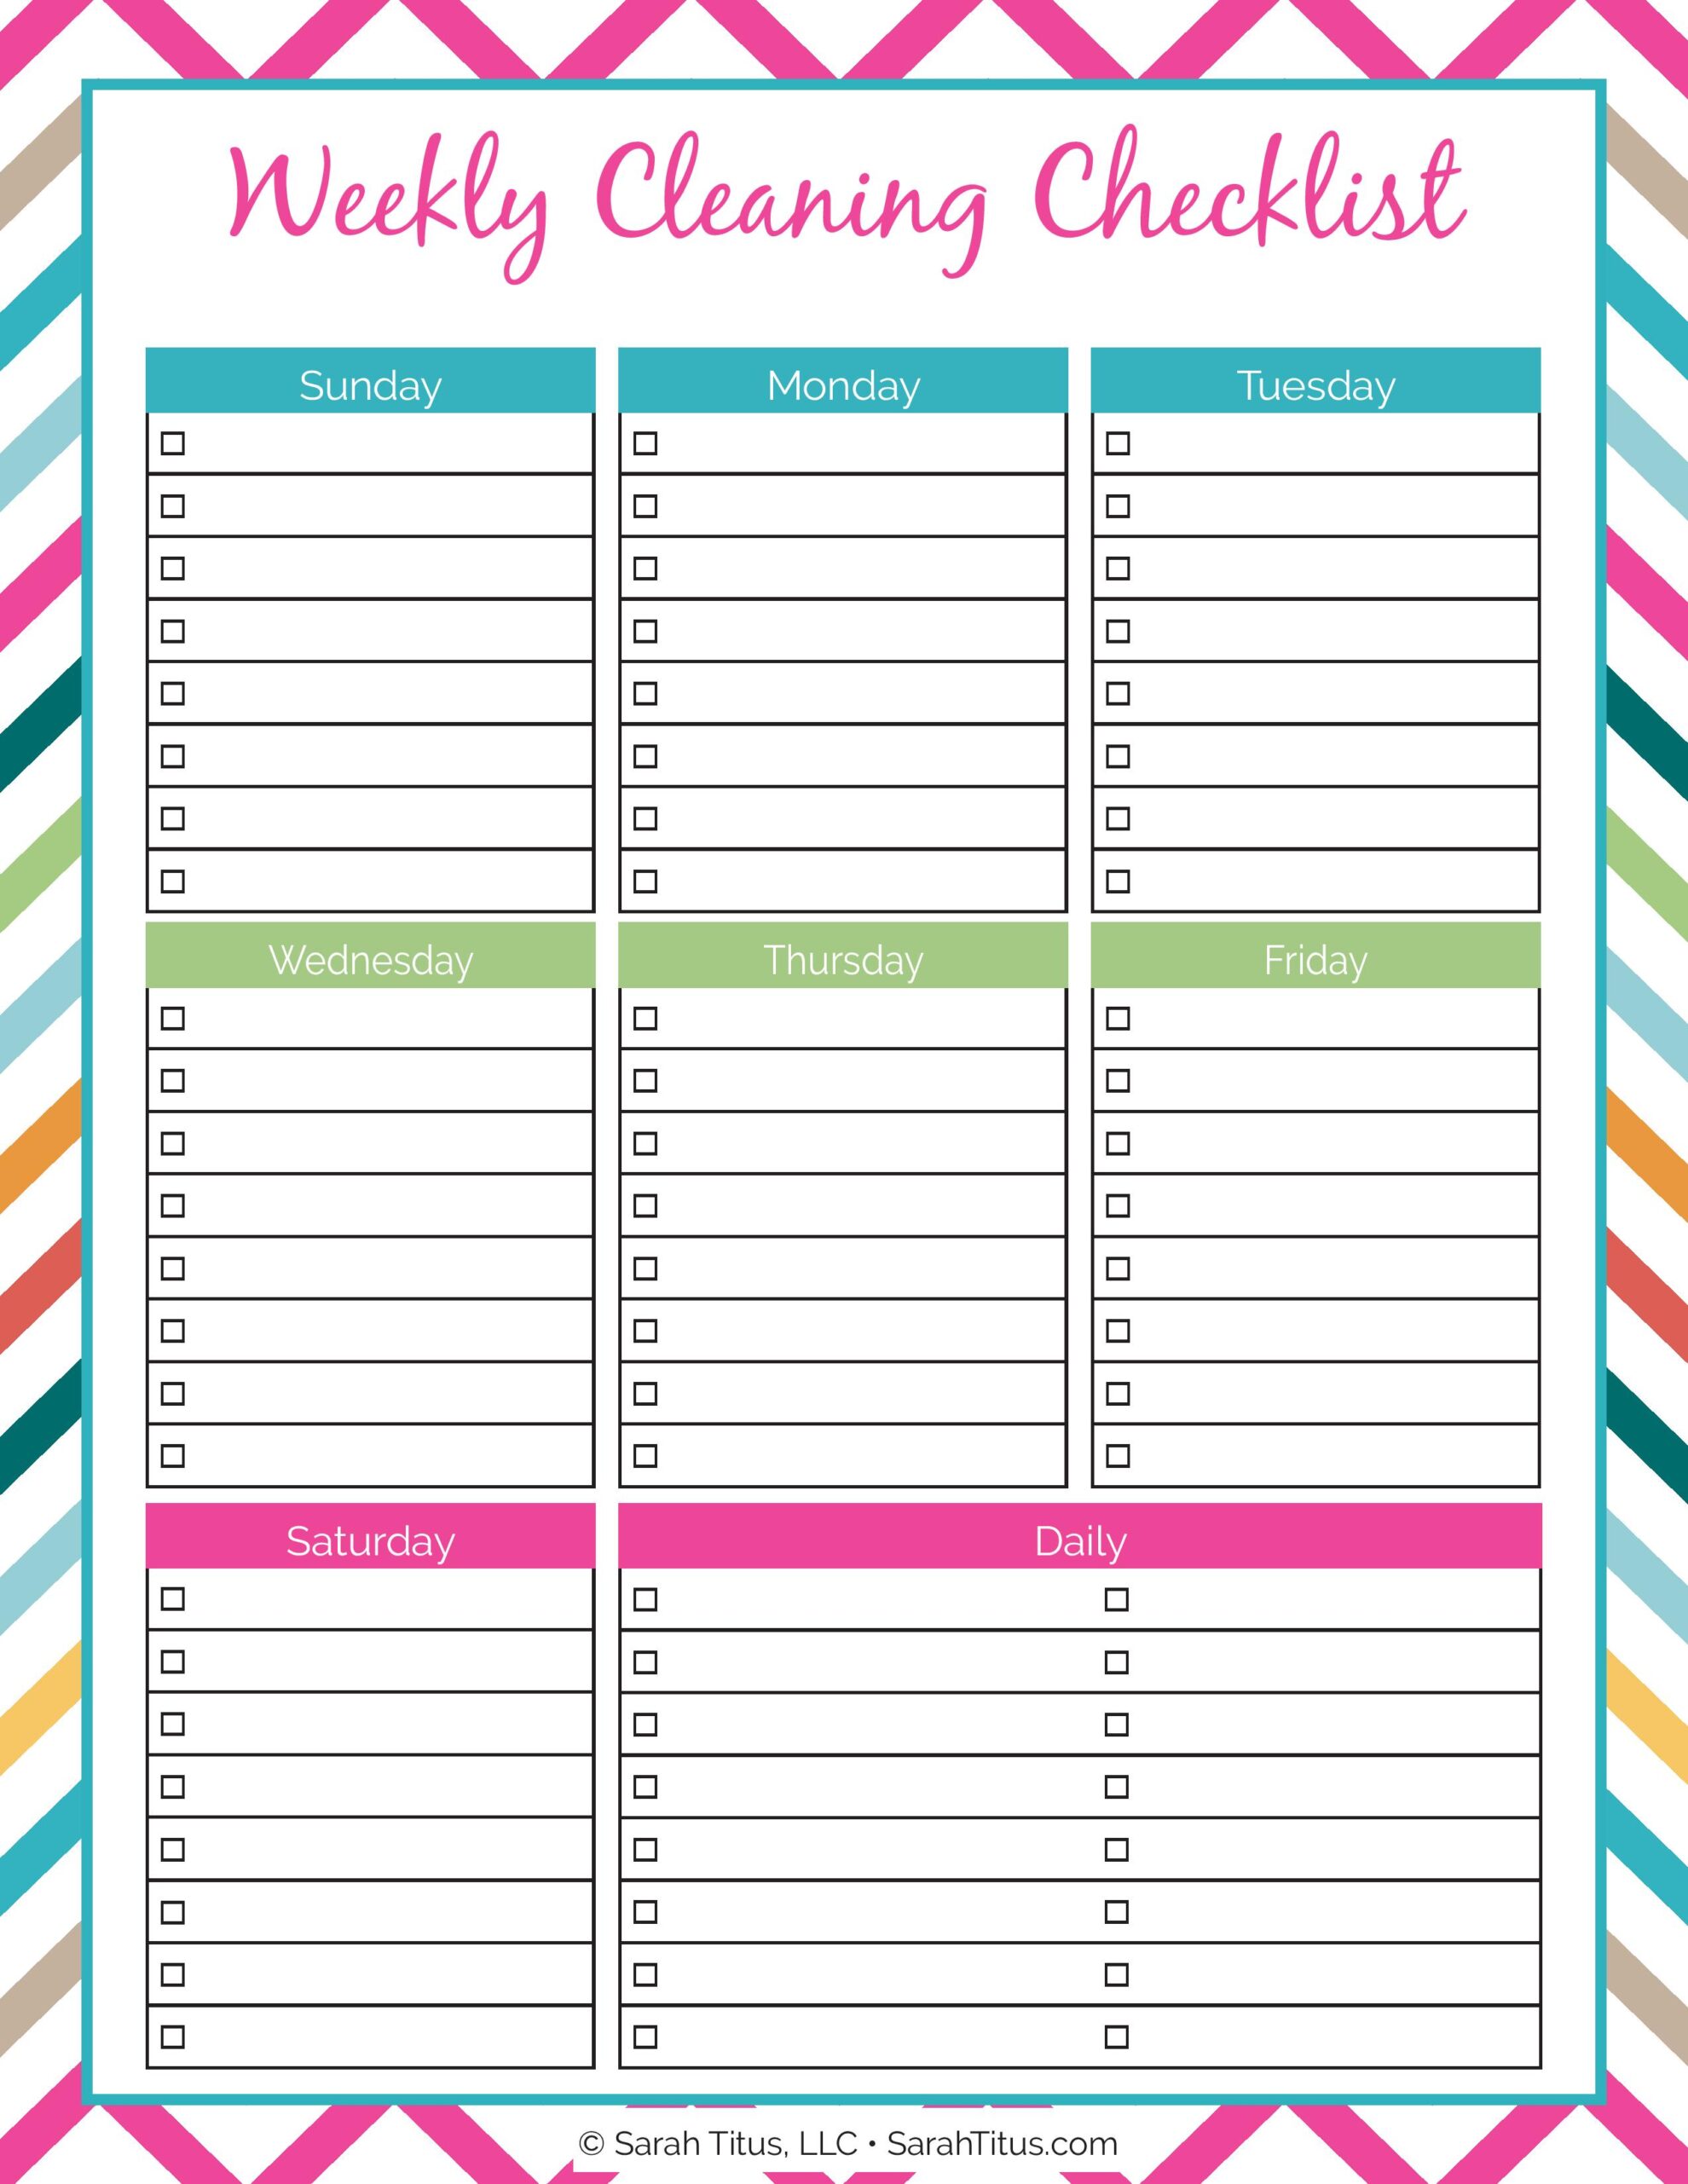 cleaning-binder-weekly-cleaning-checklist-sarah-titus